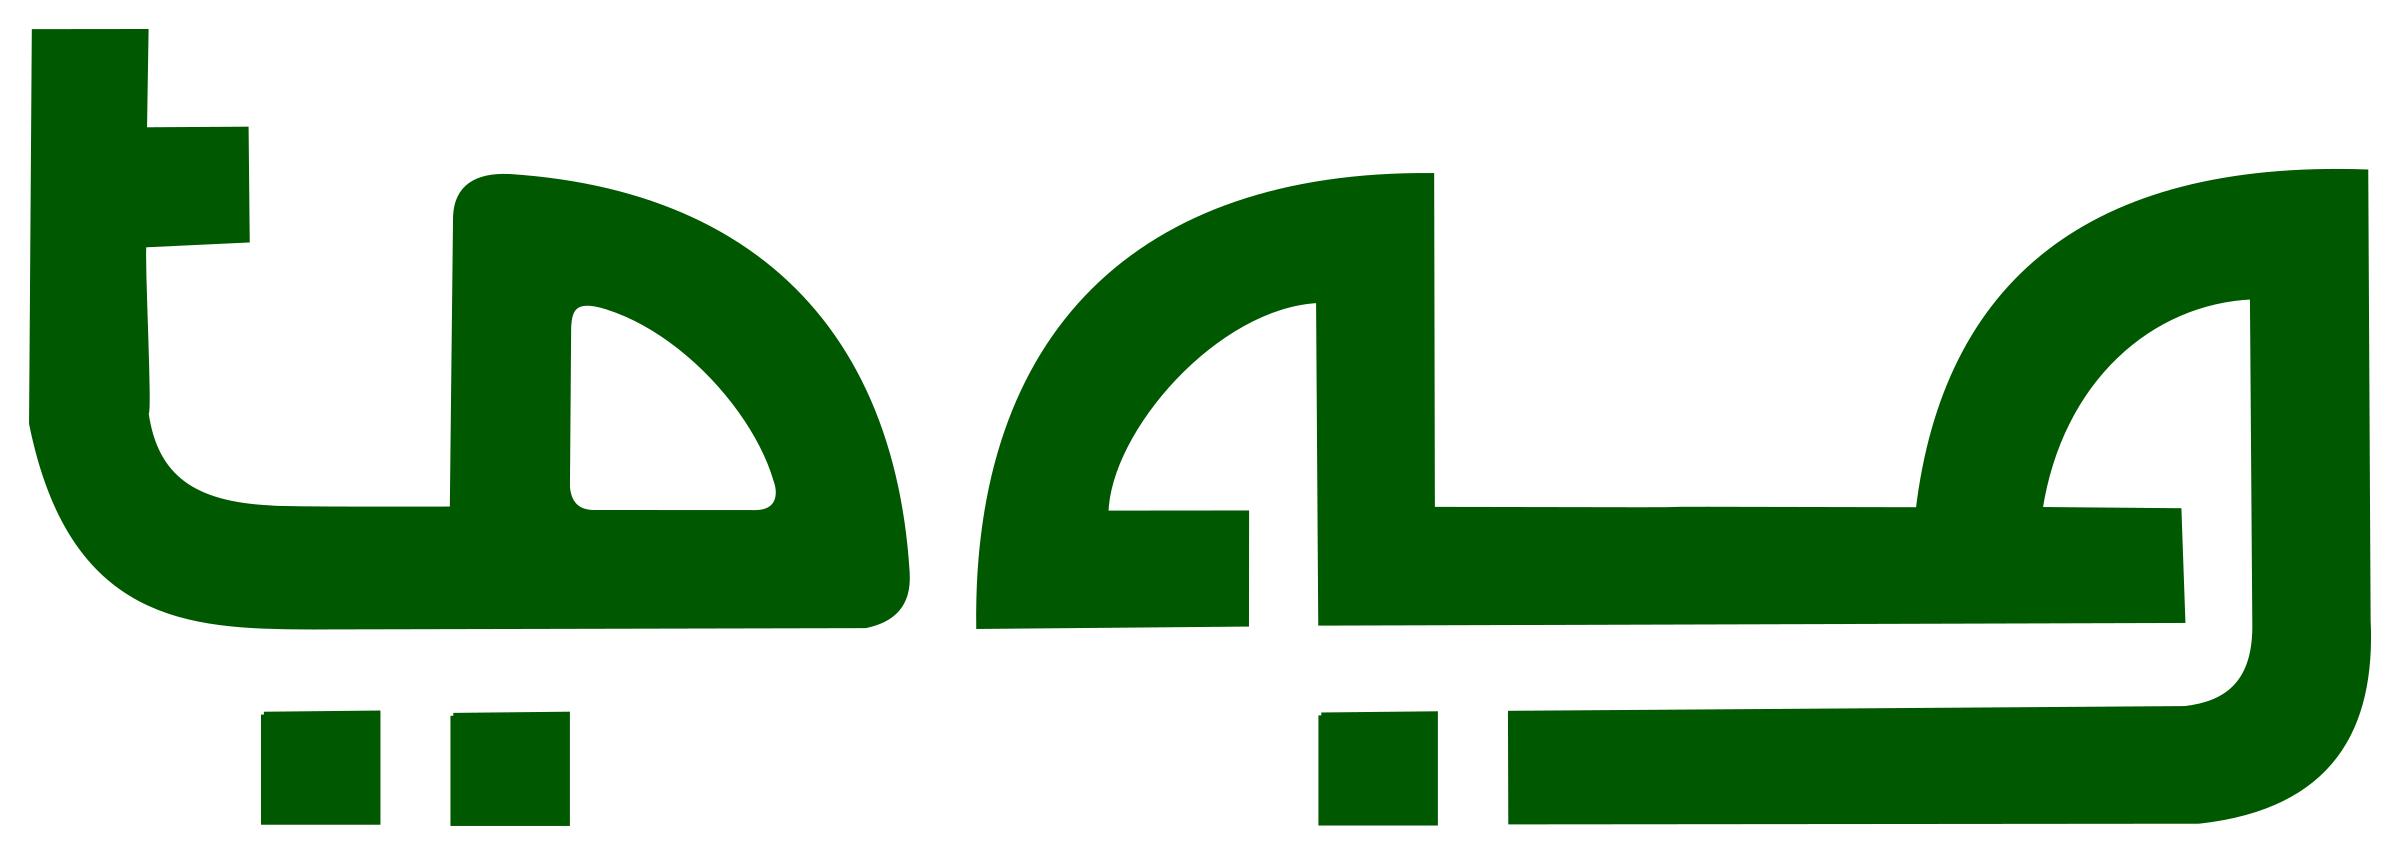 Psuedo-Arabic styled signboard png